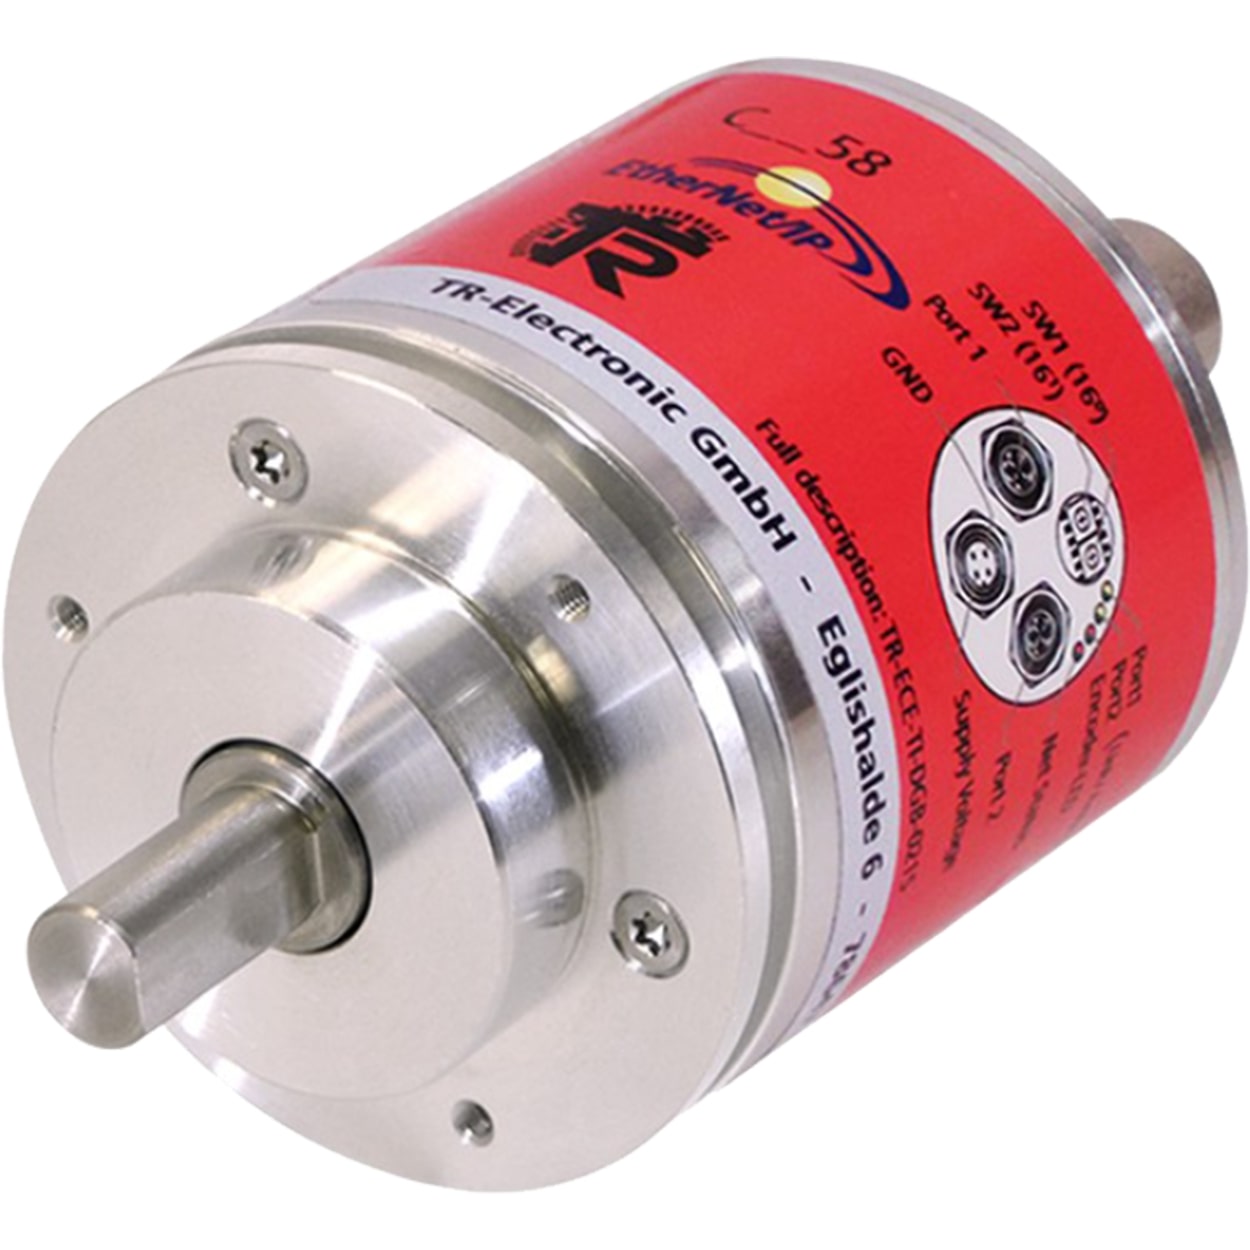 TR ELECTRONIC ABSOLUTE-ENCODER COV58 ETHERNET/IP